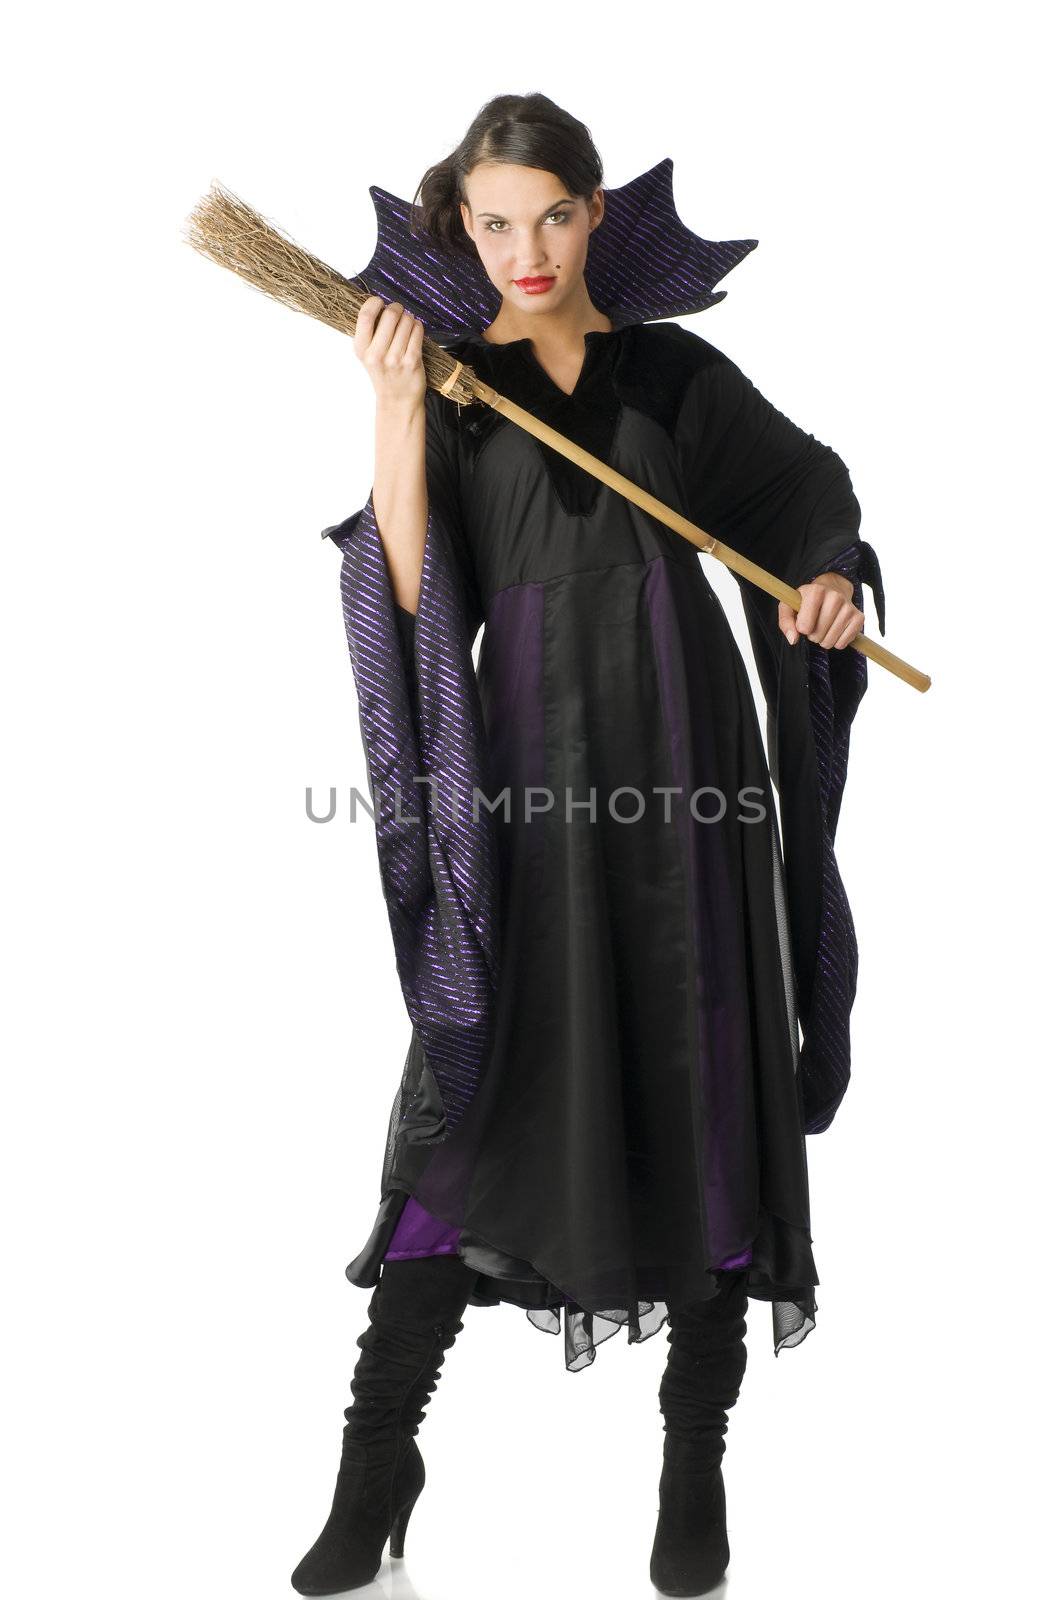 the witch in black dress with a little broom starting to fight